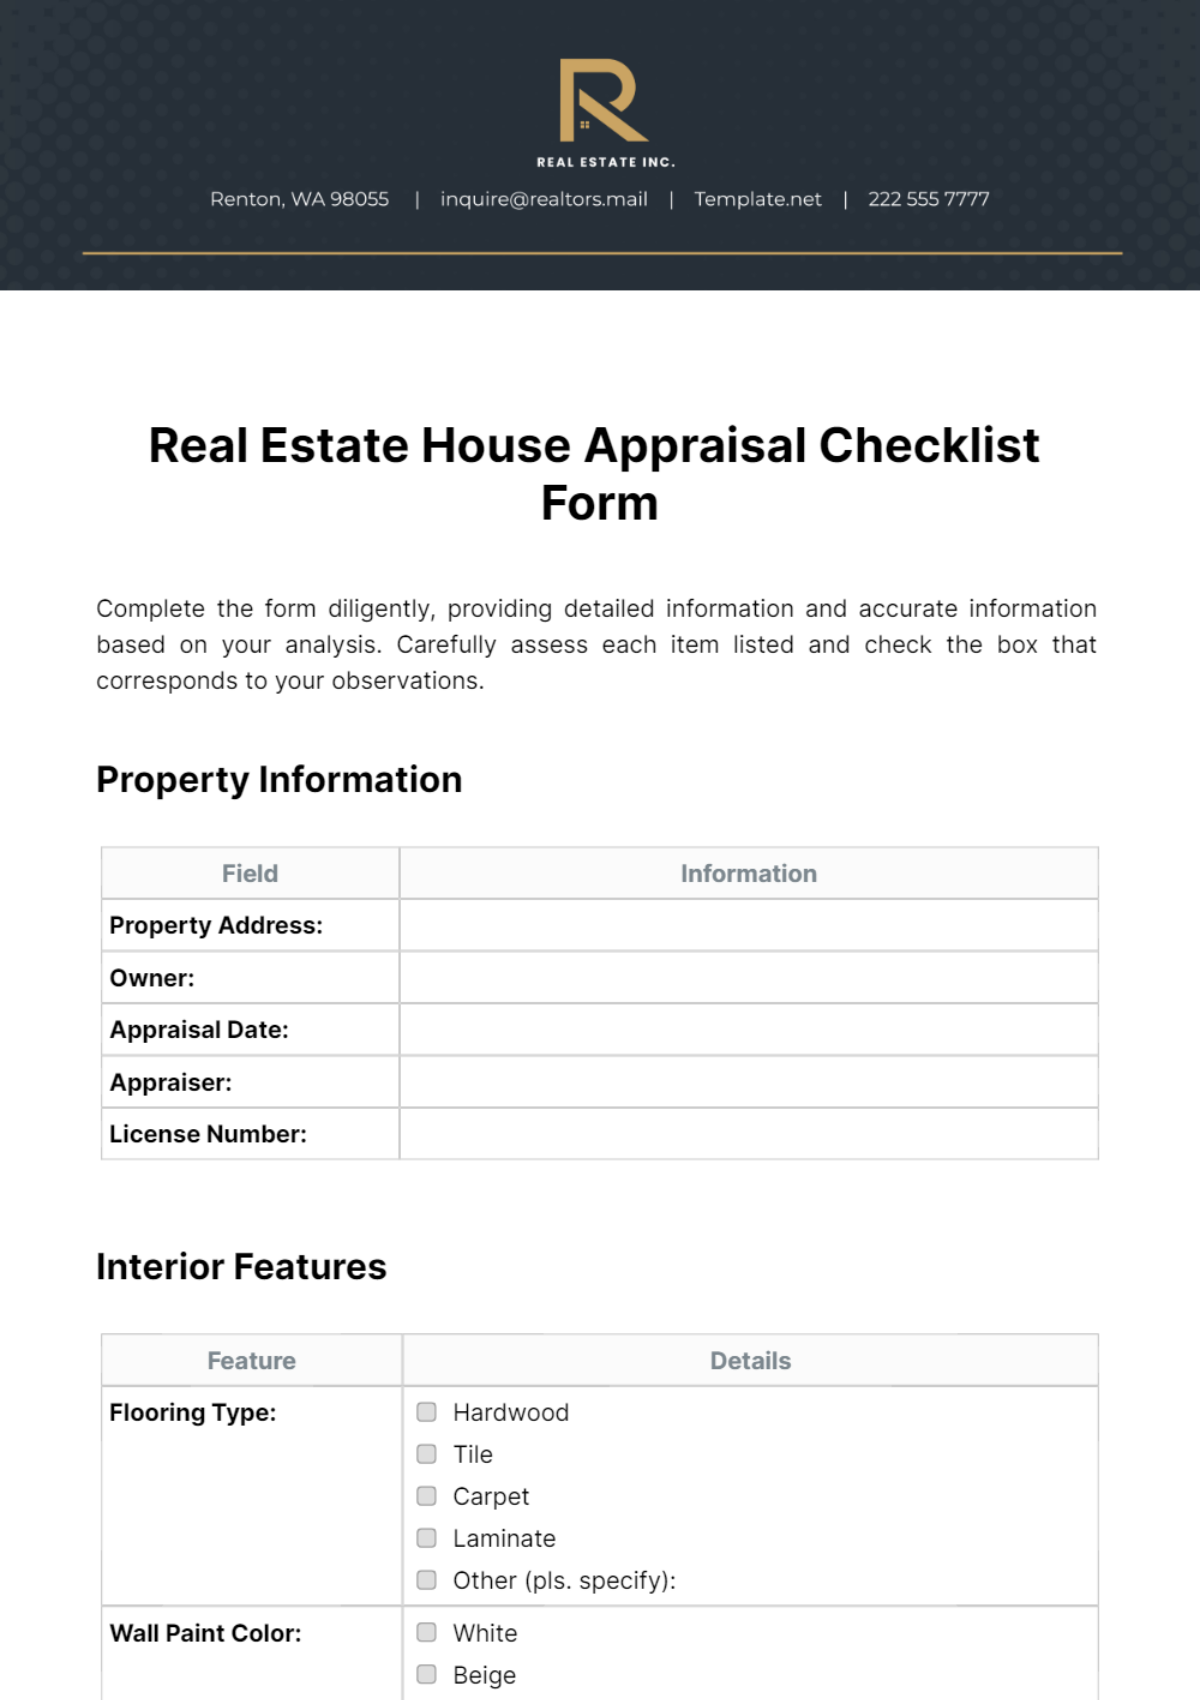 Real Estate House Appraisal Checklist Form Template